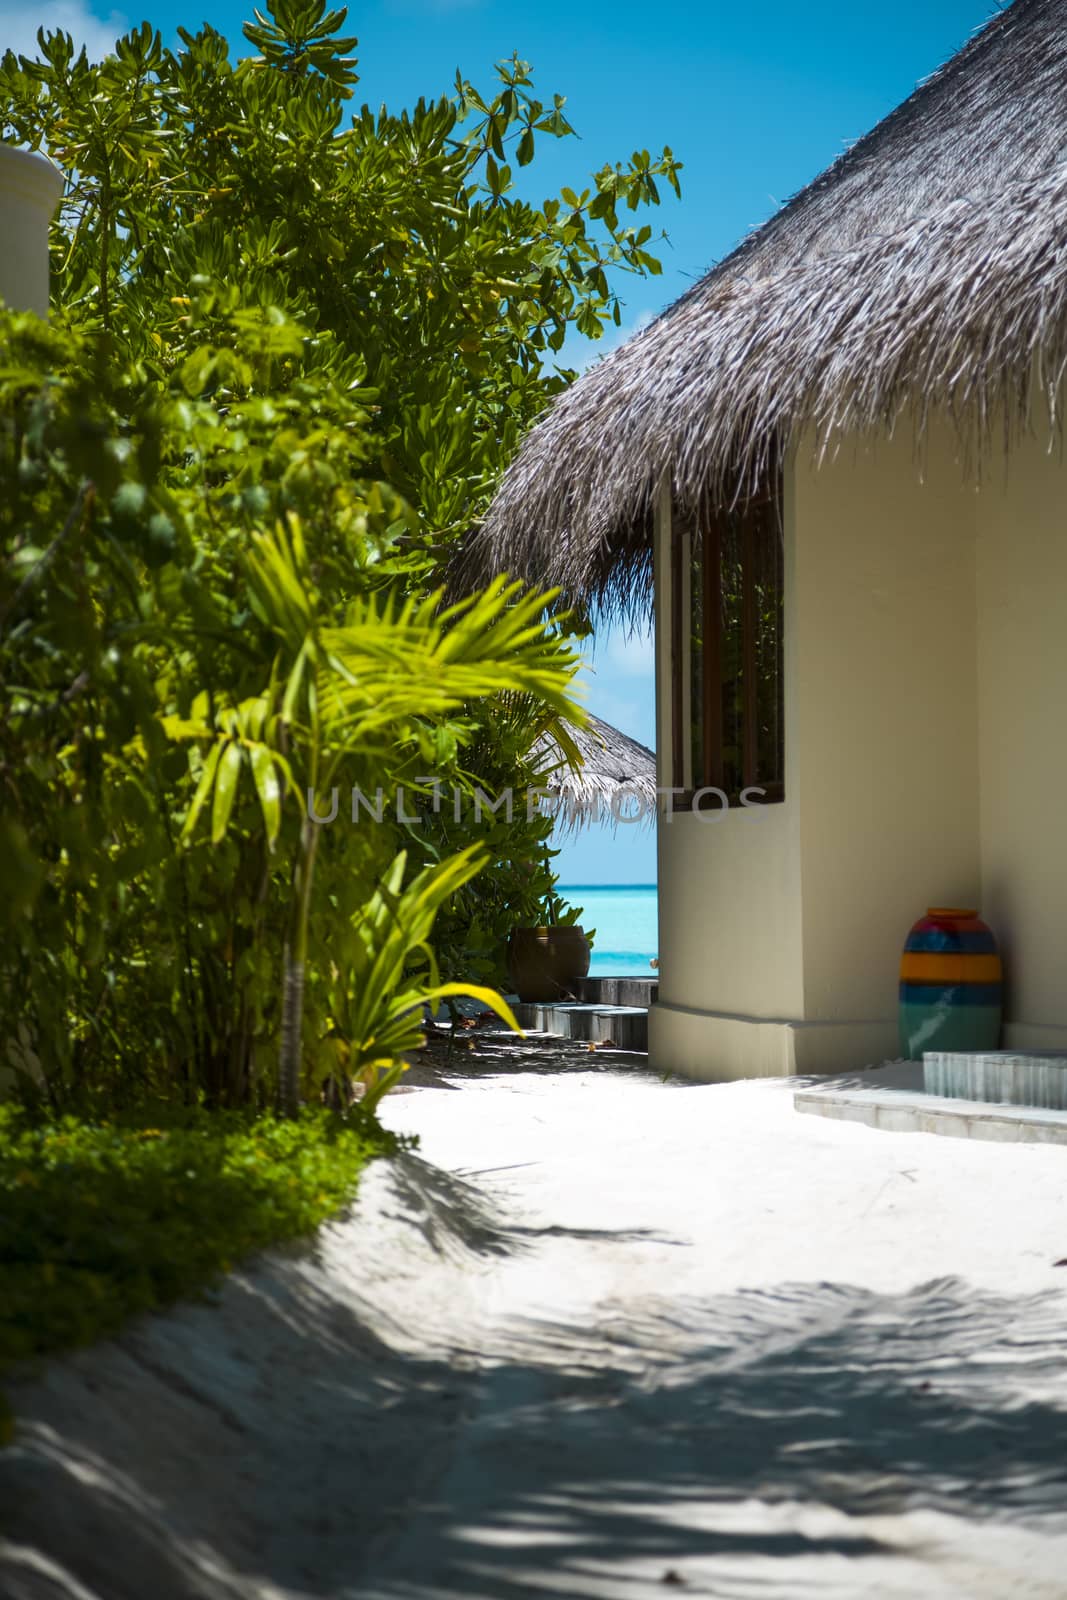 Beautiful corner of bright green vegetation and a tropical beach villa in Maldives. Charming corner in the paradise, the path is made with sand beach. At background it can be seen the sky and sea with its tones of turquoise.